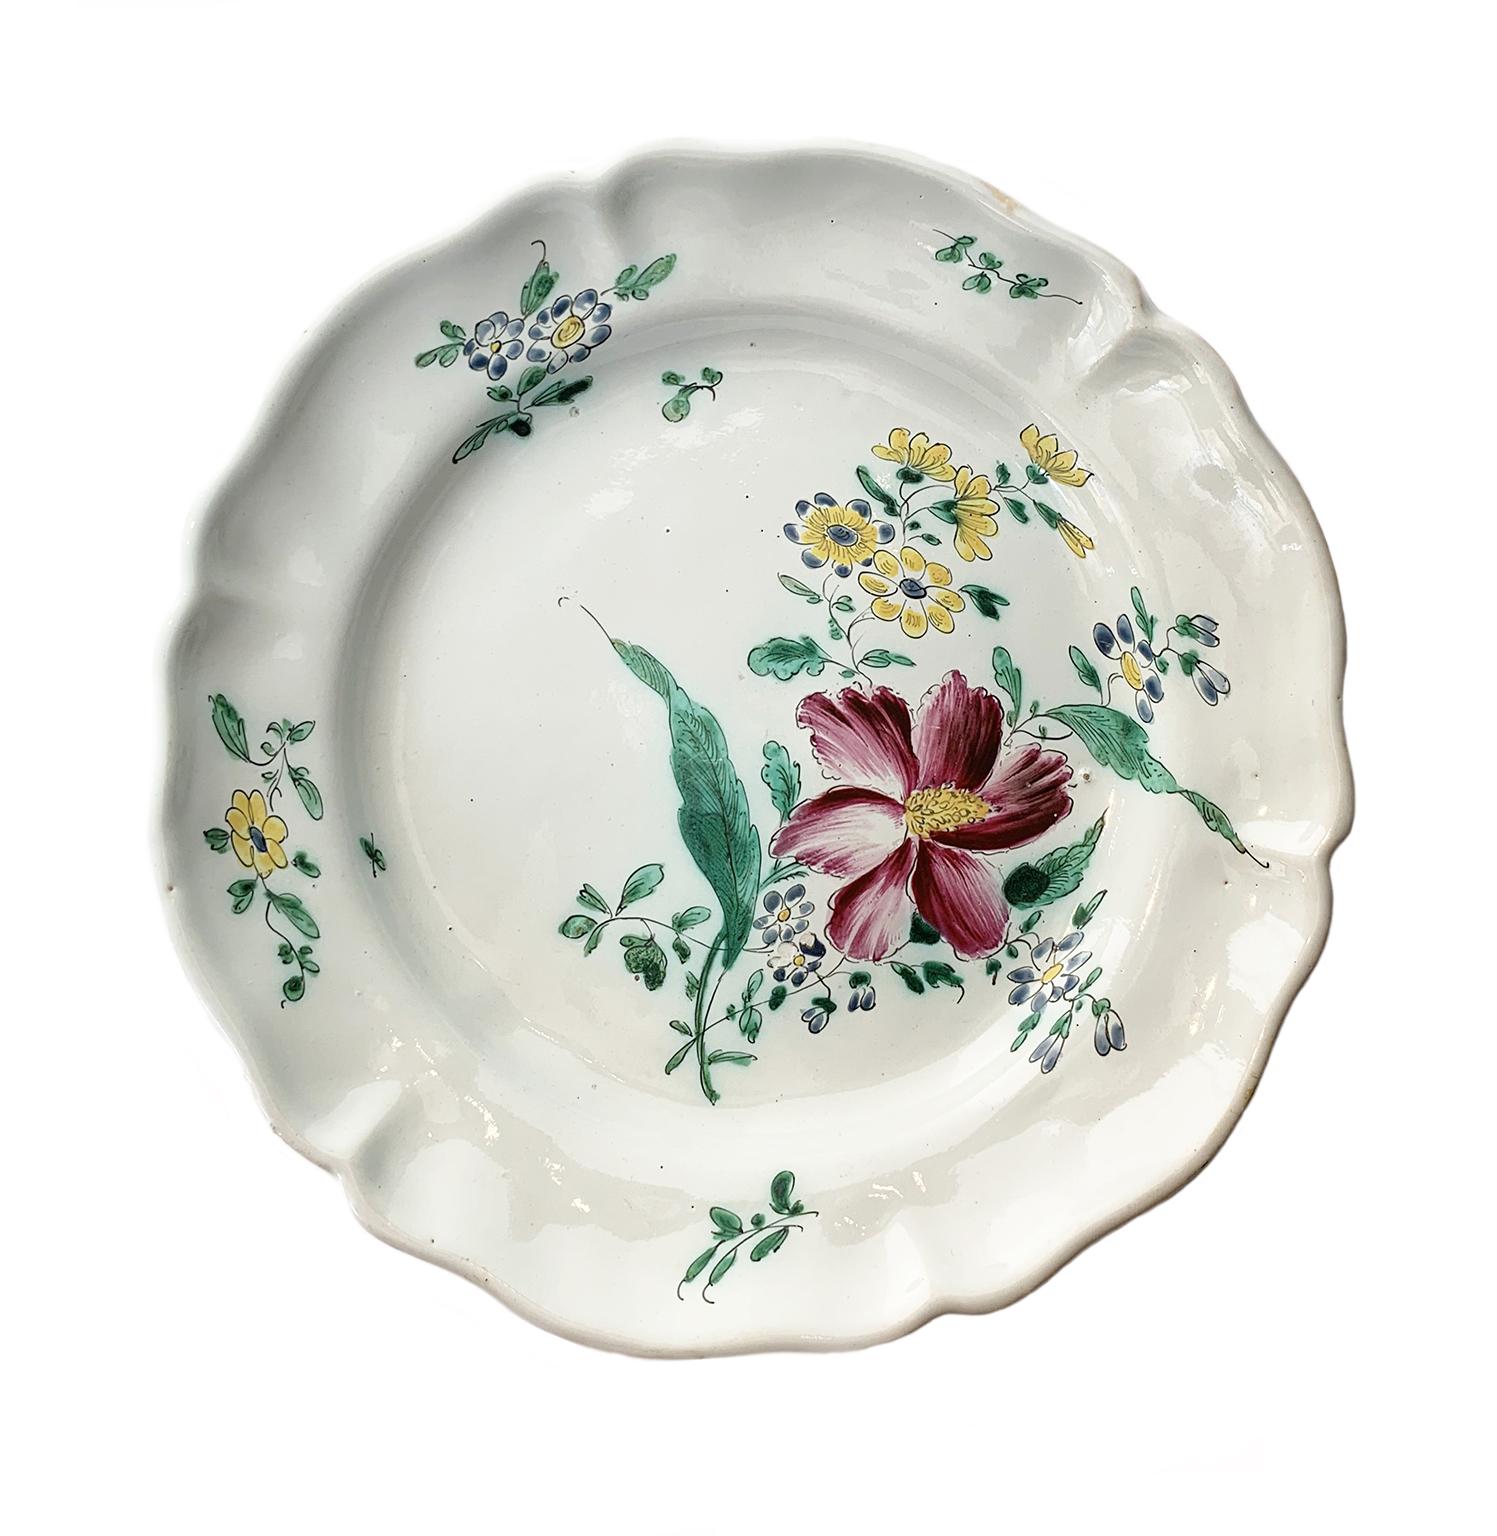 Ancient Maiolica Dishes with flowers, Lombard Manufacture, 1770-1780 Circa For Sale 2